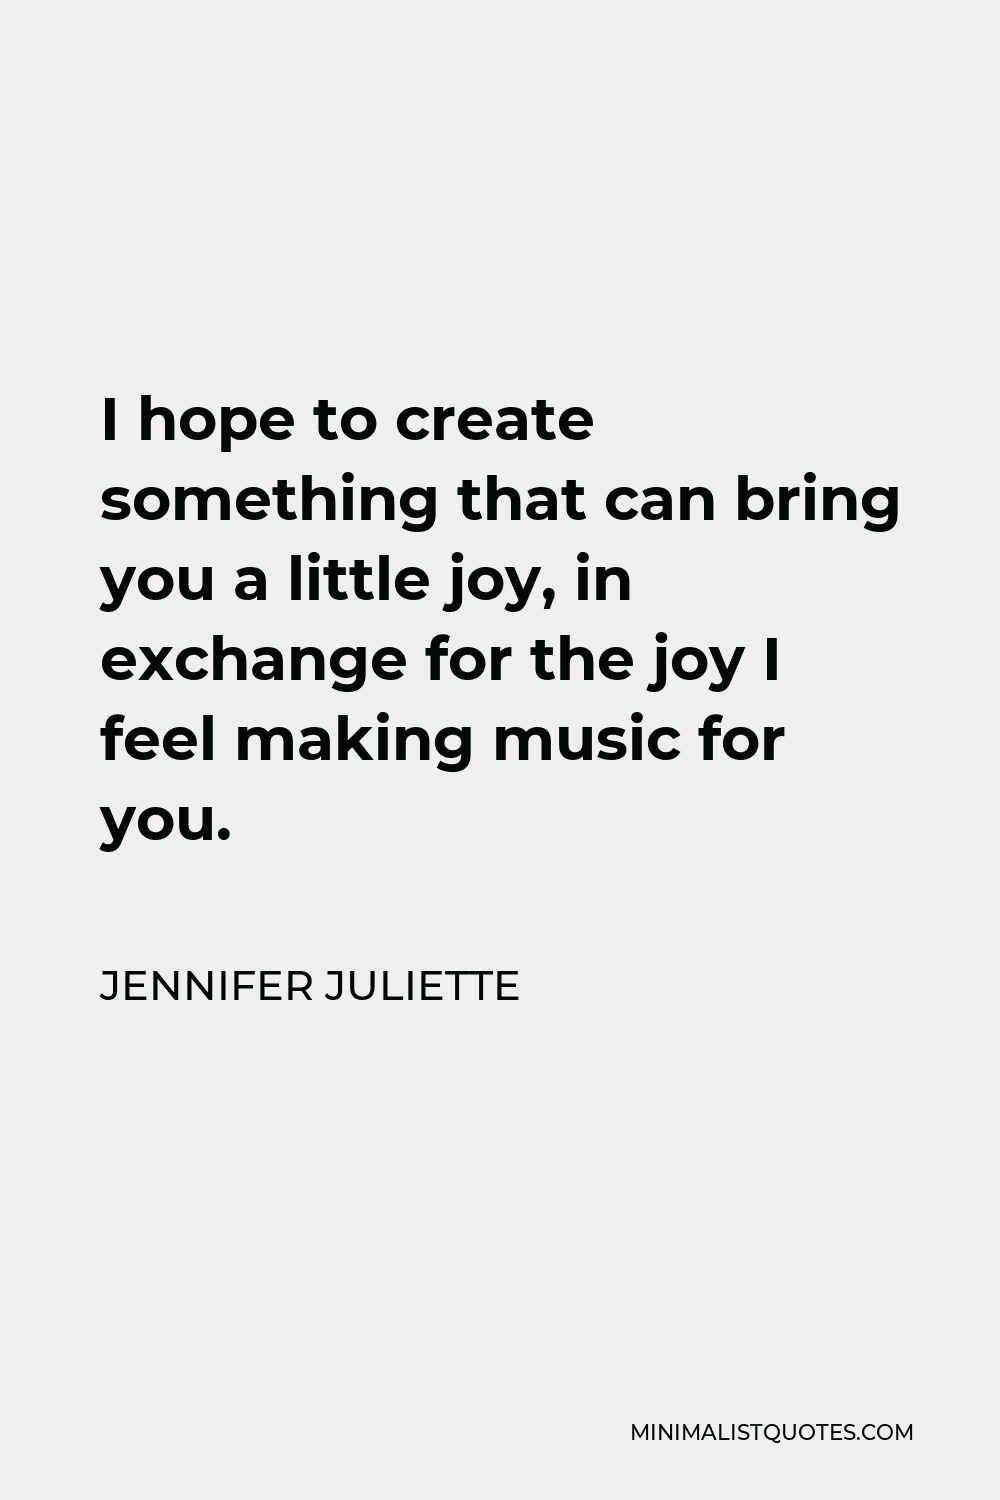 Jennifer Juliette Quote - I hope to create something that can bring you a little joy, in exchange for the joy I feel making music for you.